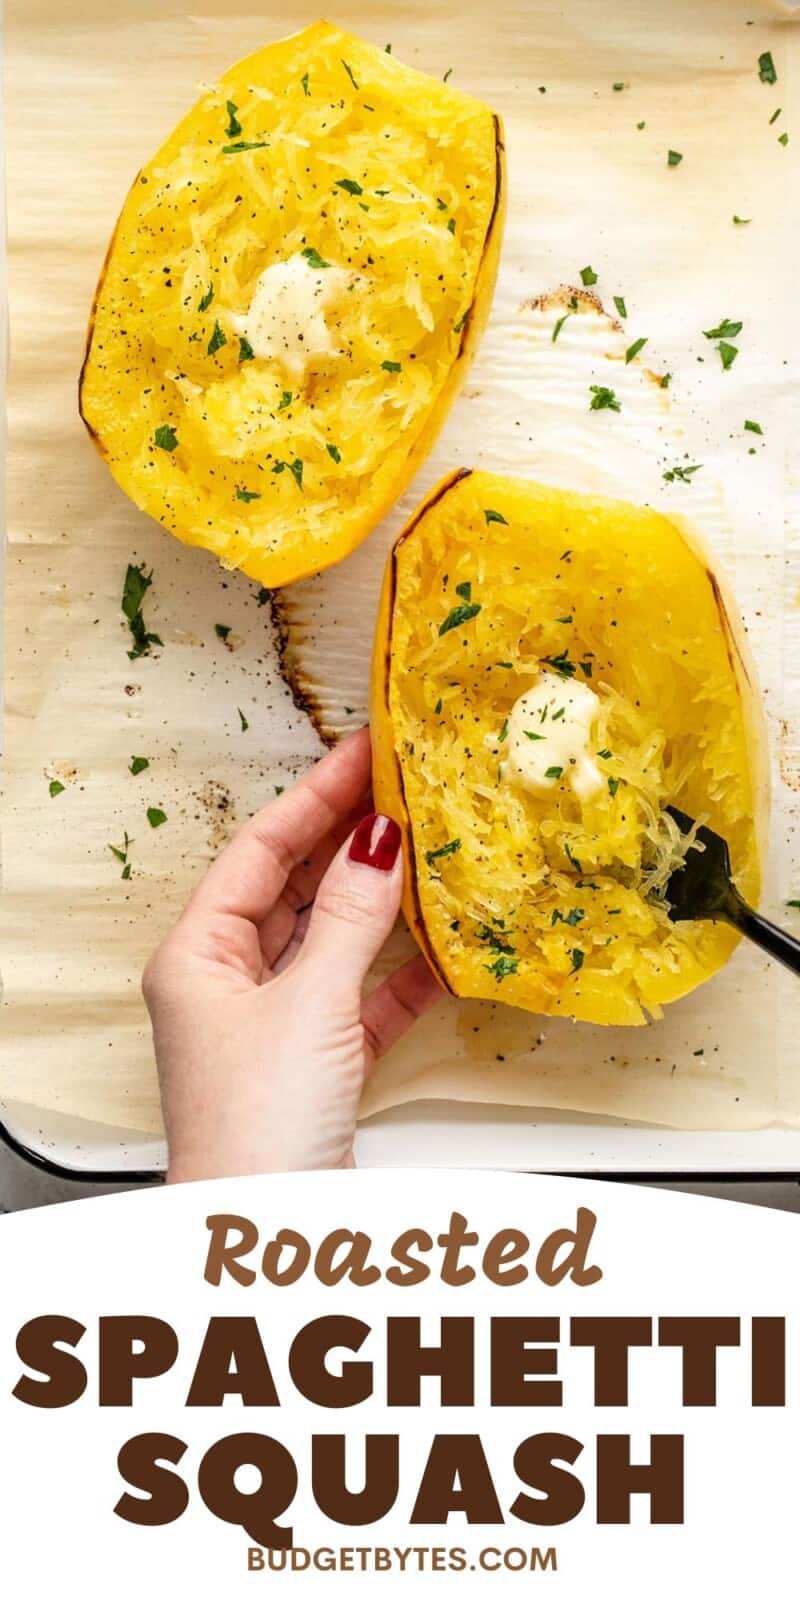 Overhead shot of roasted spaghetti squash dressed with butter and chopped Italian parsley. witha hand holding it and a fork in it.